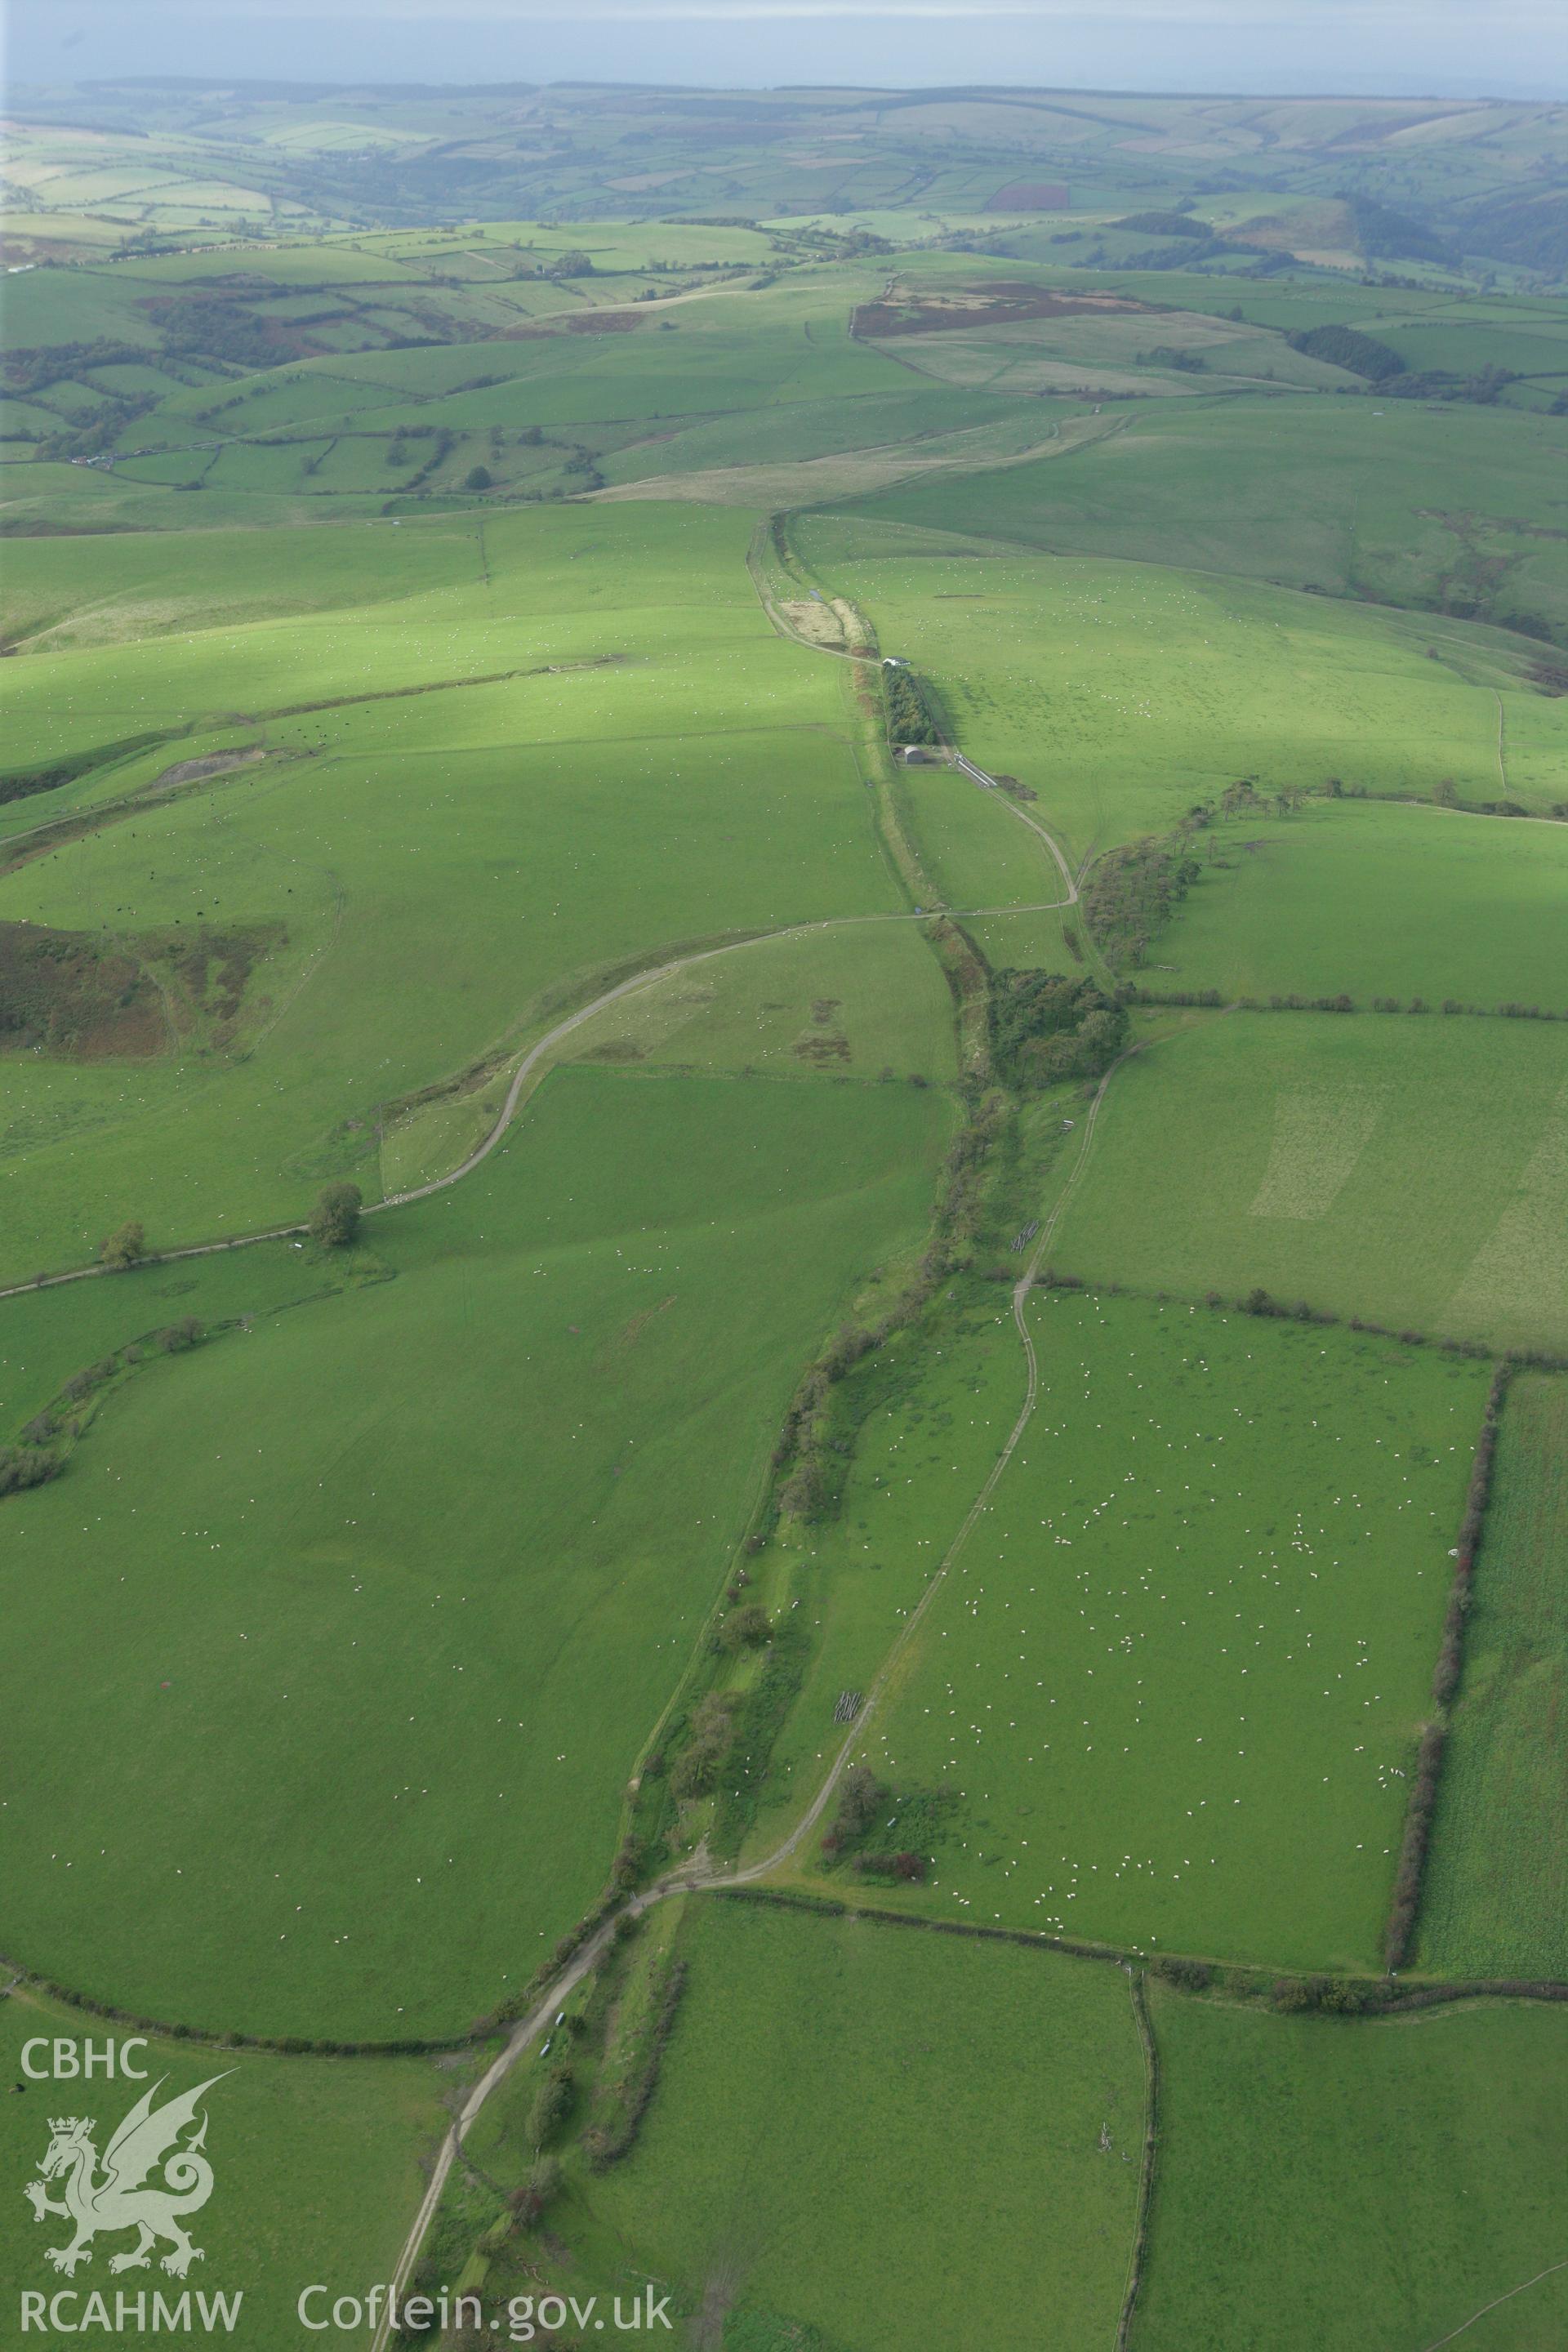 RCAHMW colour oblique photograph of Offa's Dyke, England. Taken by Toby Driver on 10/10/2008.